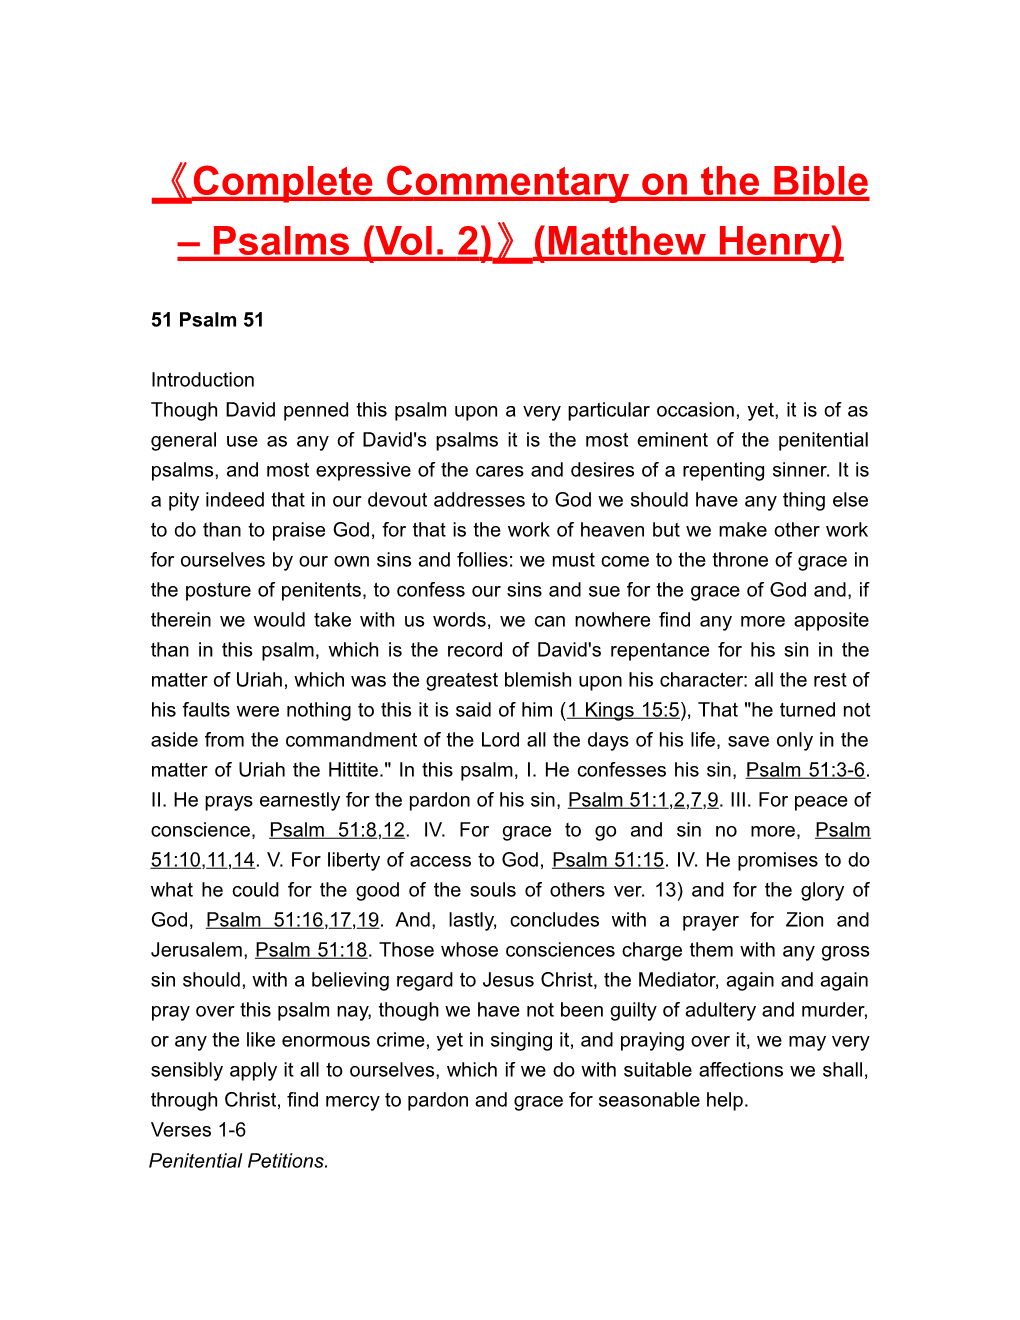 Complete Commentary on the Bible Psalms (Vol. 2) (Matthew Henry)